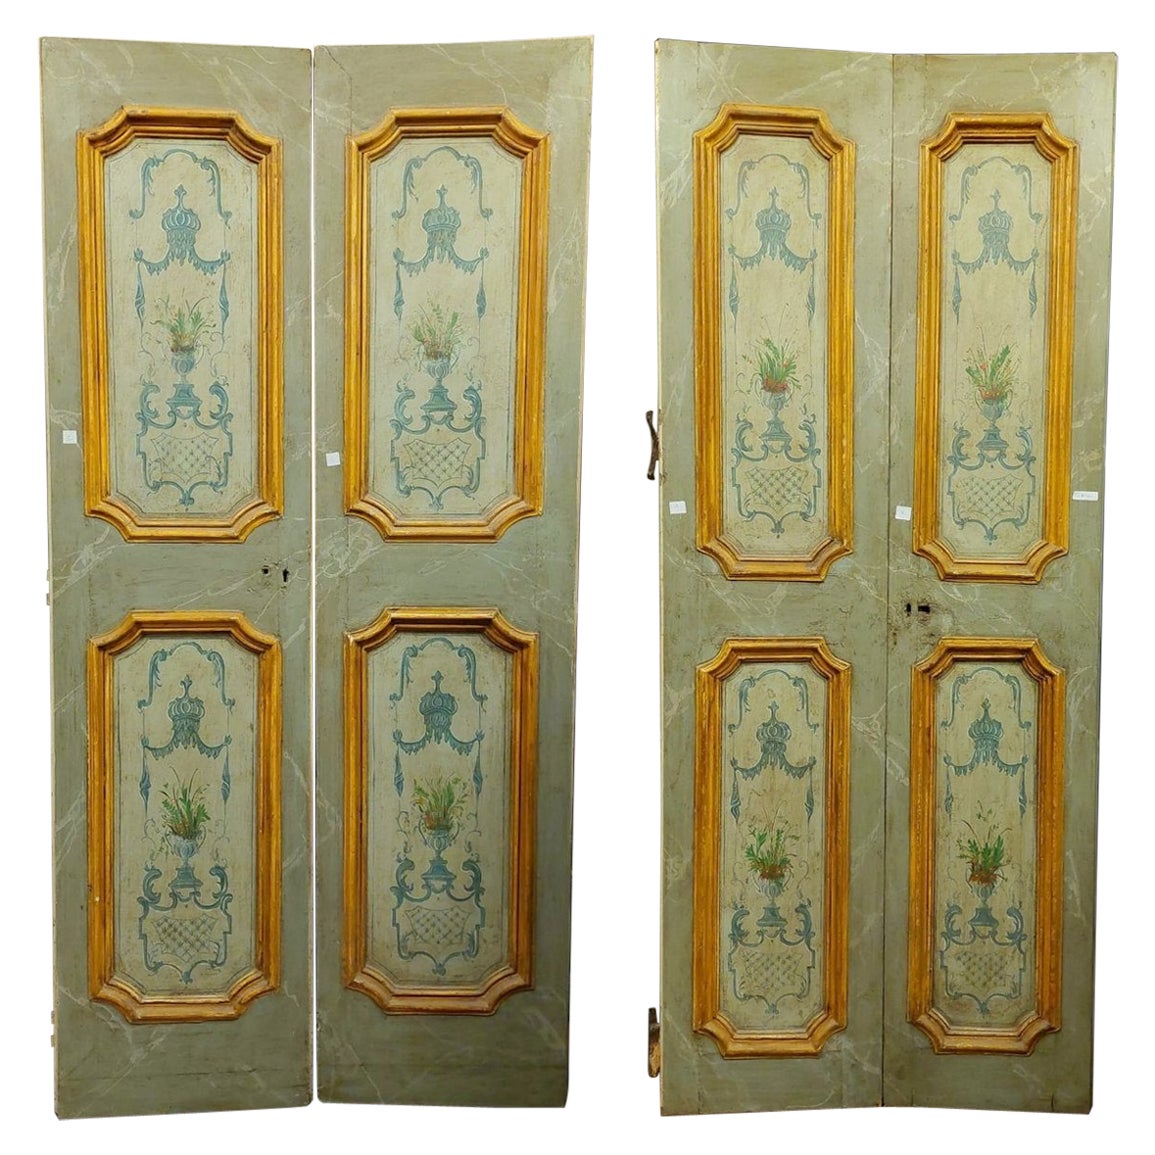 Set of 2 lacquered and painted doors, green and yellow, 18th century Rome